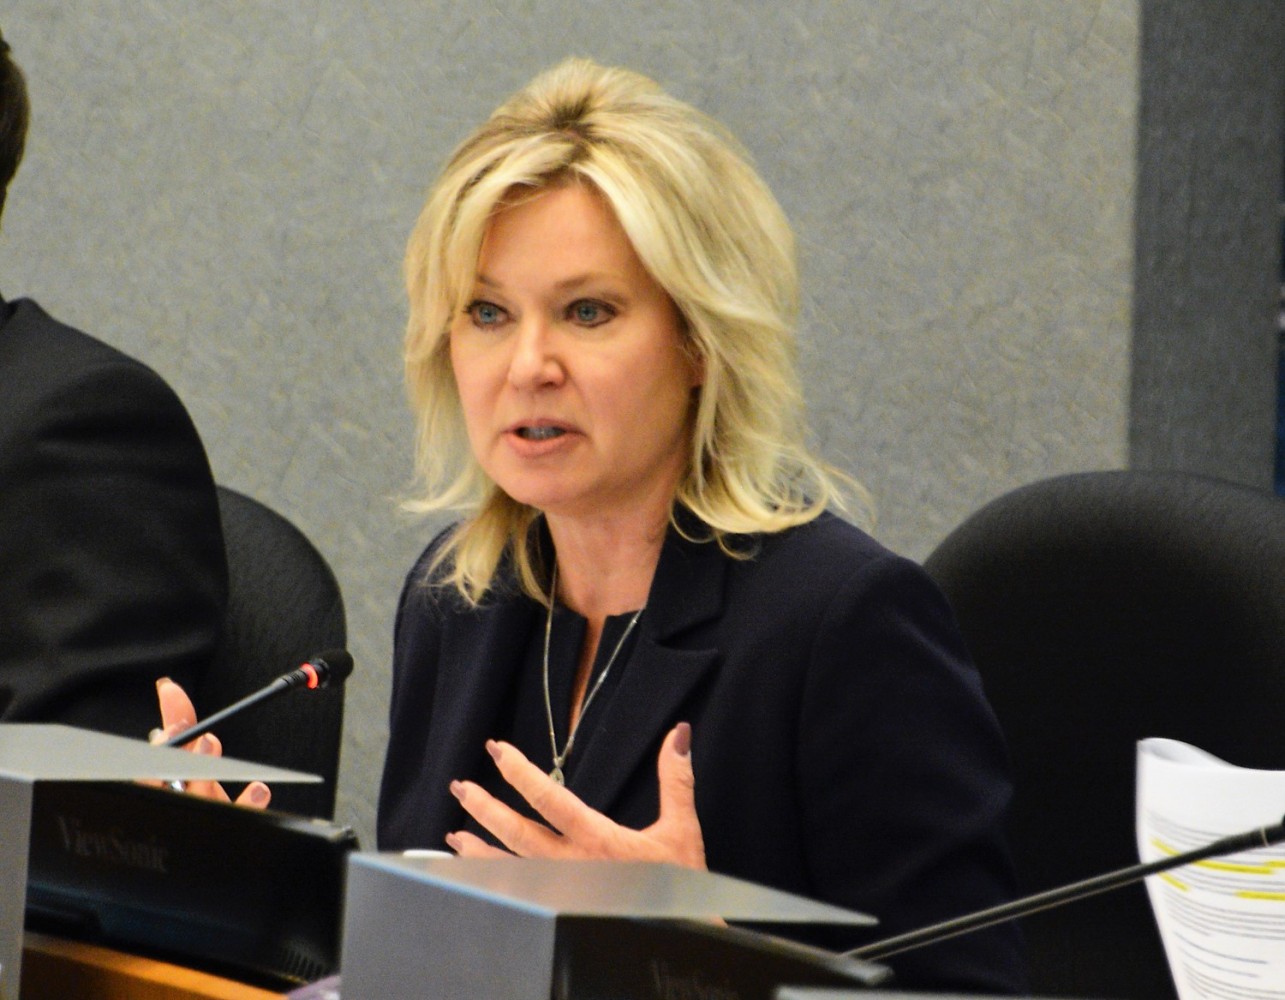 As Mississauga's mayor ramps up efforts to separate from Peel Region, dueling numbers have emerged suggesting different outcomes